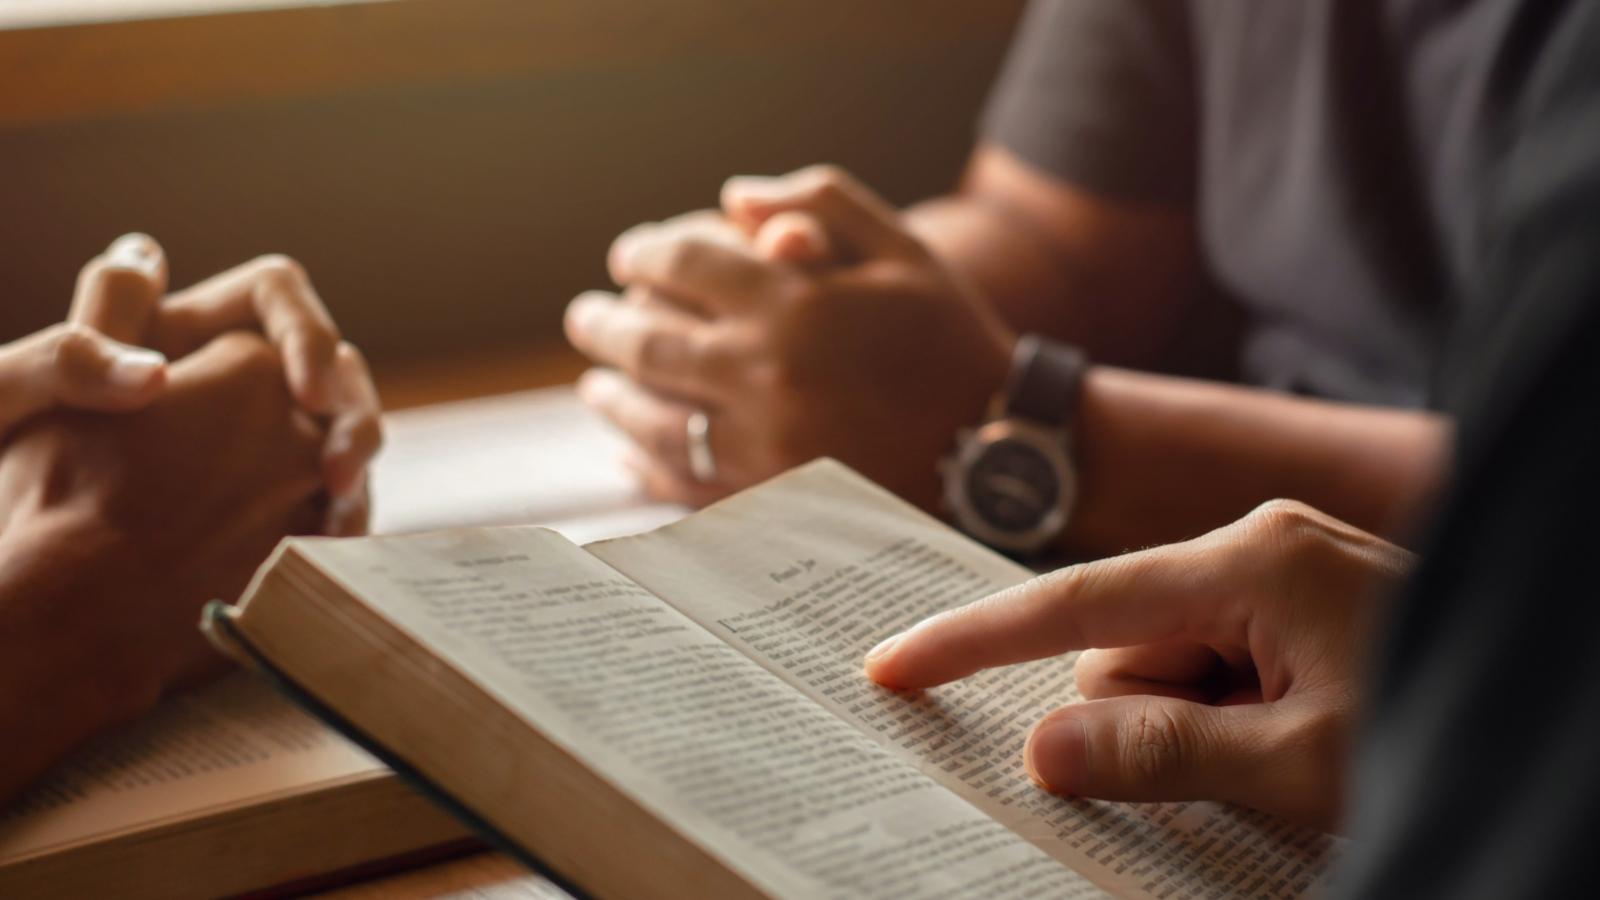 young man reading bible with friends who are praying to God Join the cell group at the church. A small group of Christians or concepts in a church at a church.